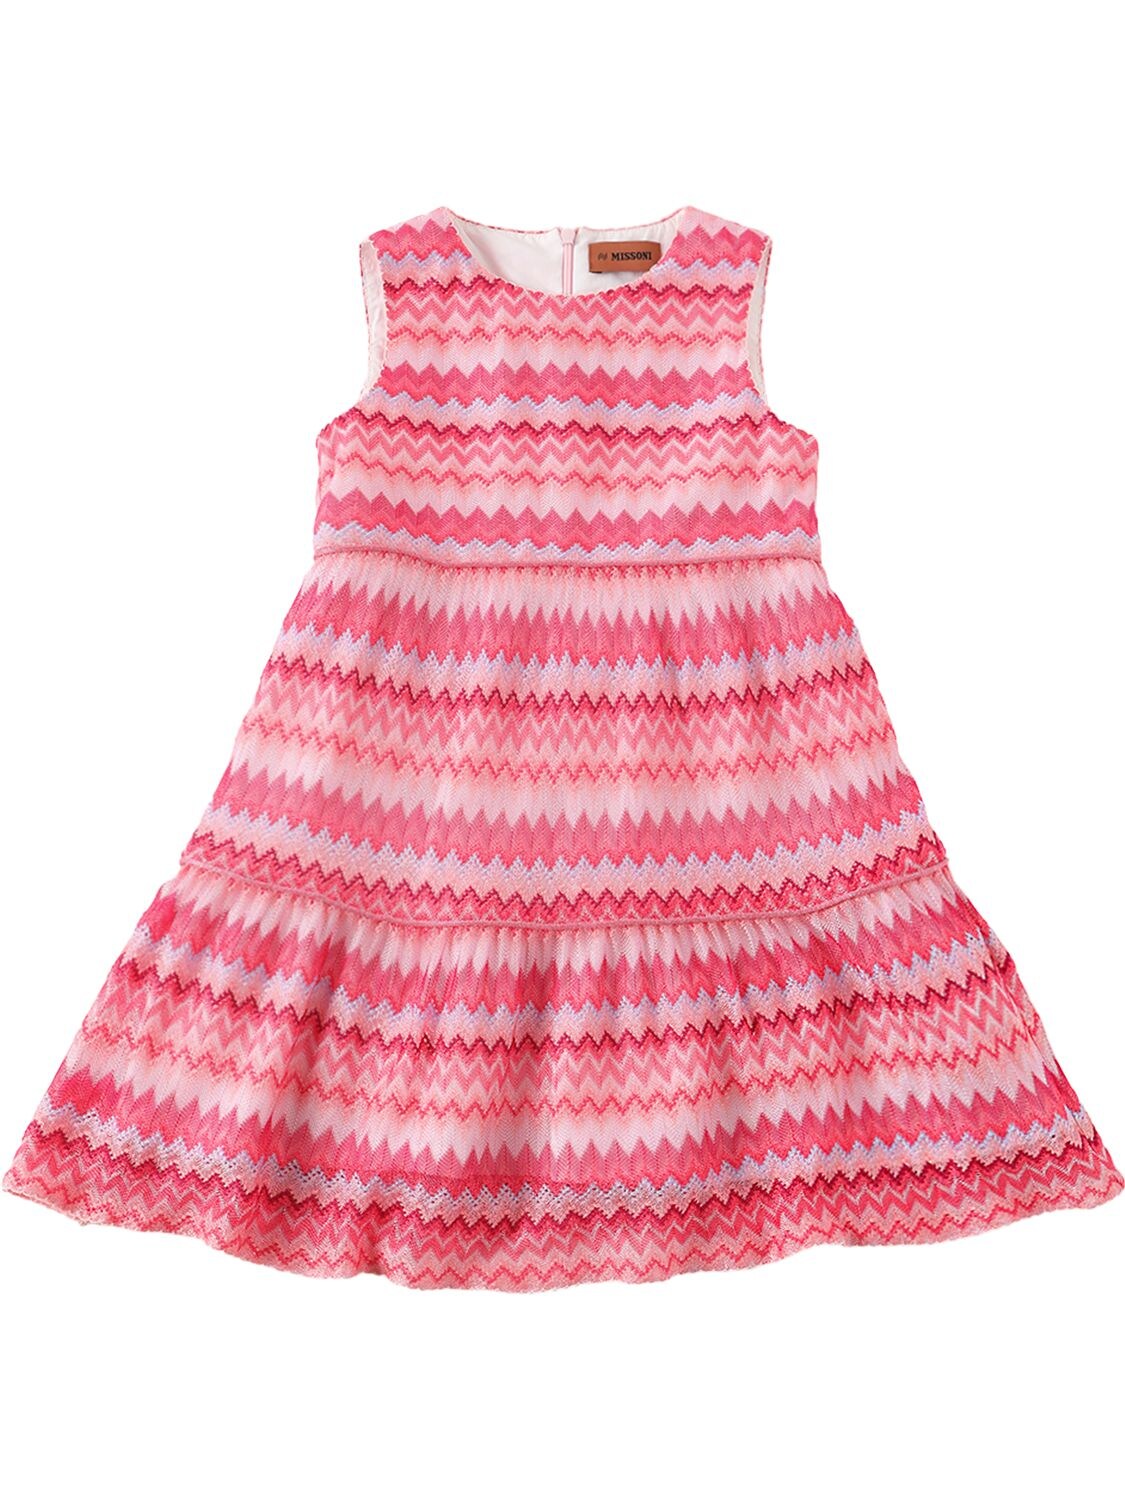 MISSONI RACHELLE KNITTED PARTY DRESS